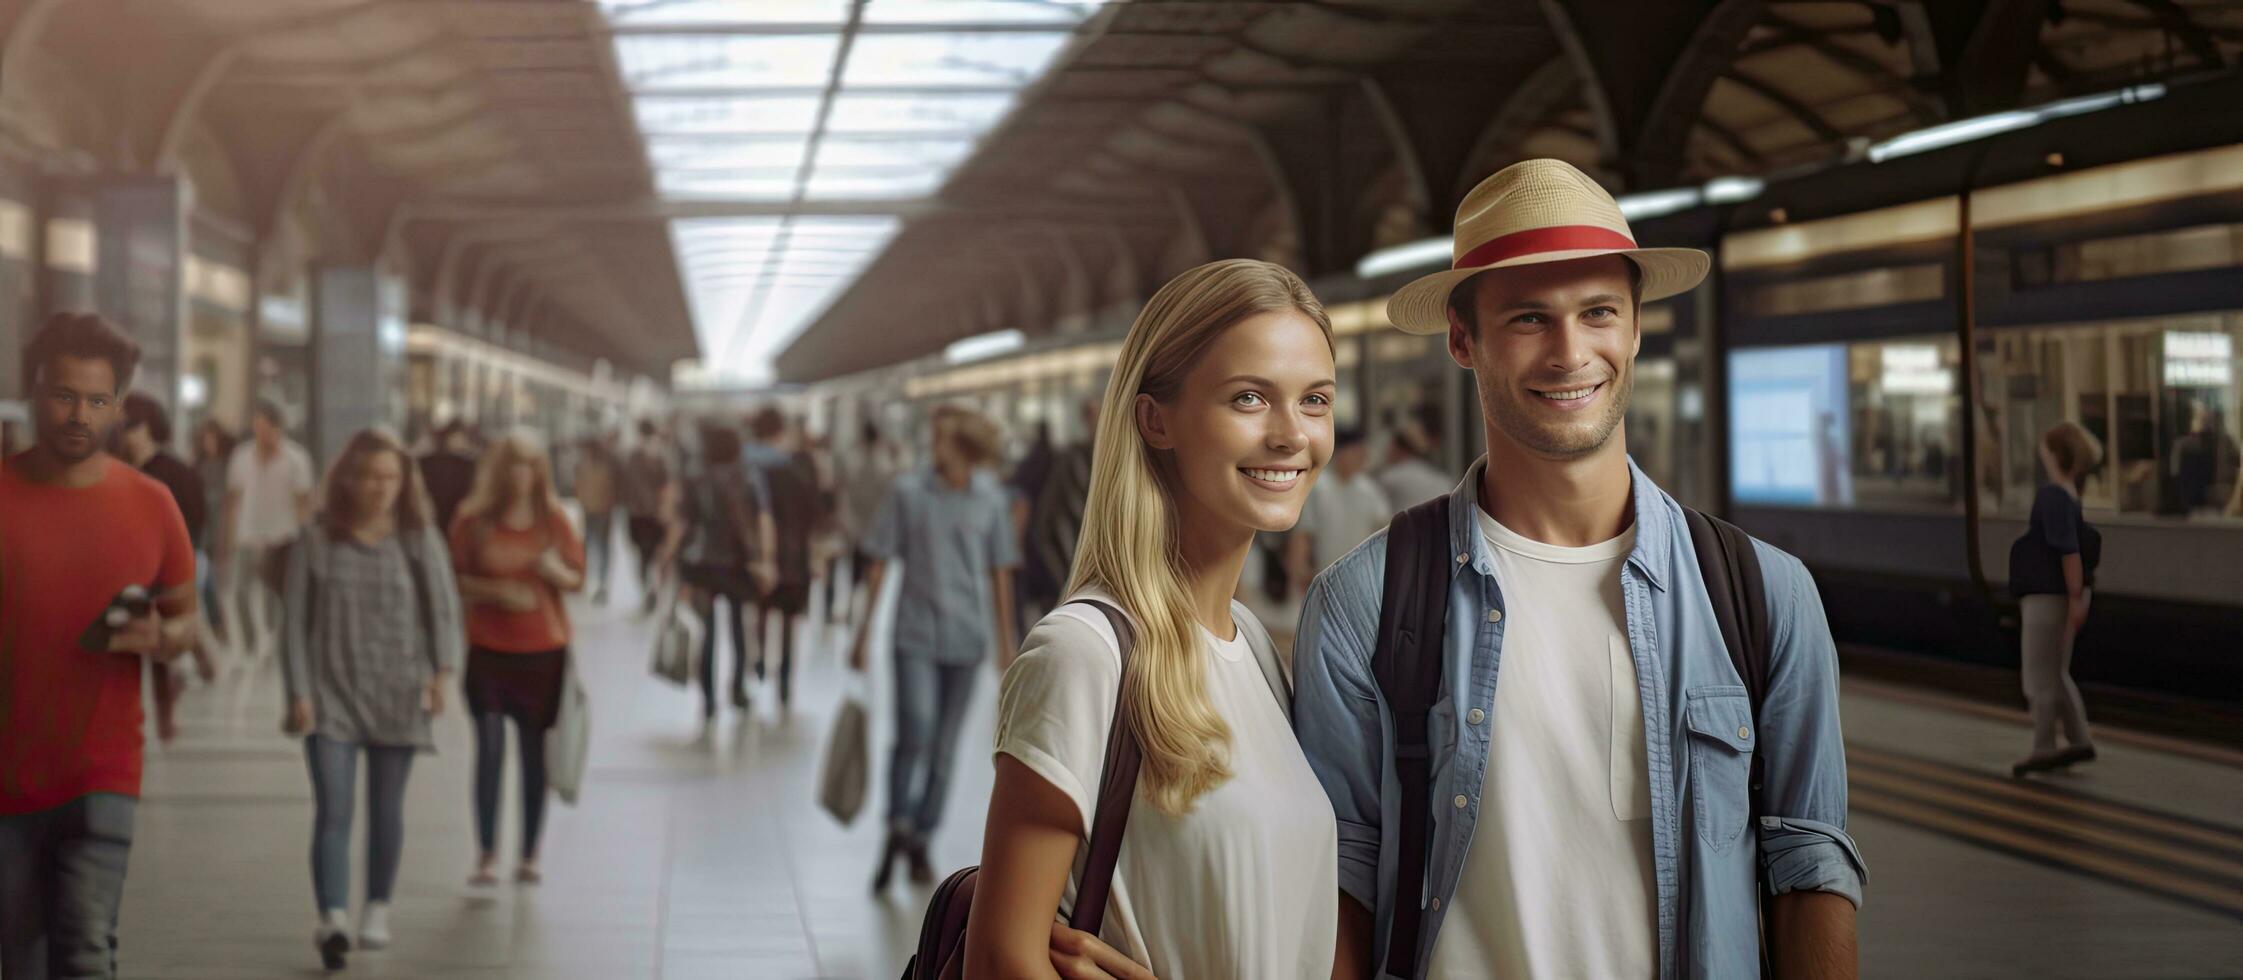 Tourists are excitedly waiting for their journey in the train station photo